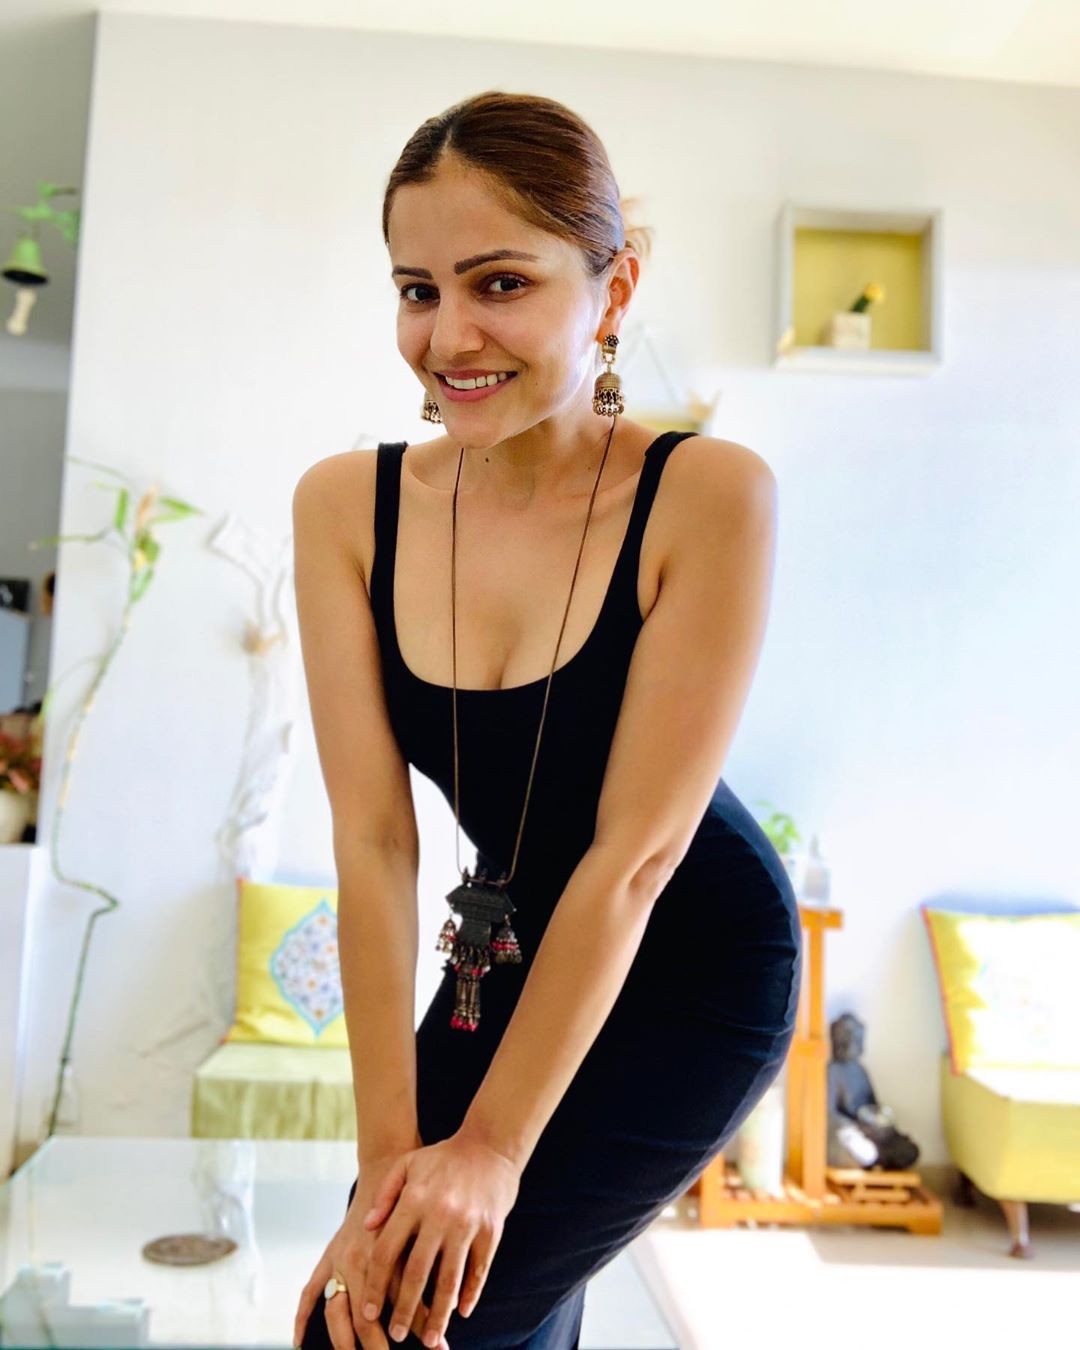 Rubina Dilaik Refutes Pregnancy Rumours But Will Not Be Taking On Any New Projects This Year